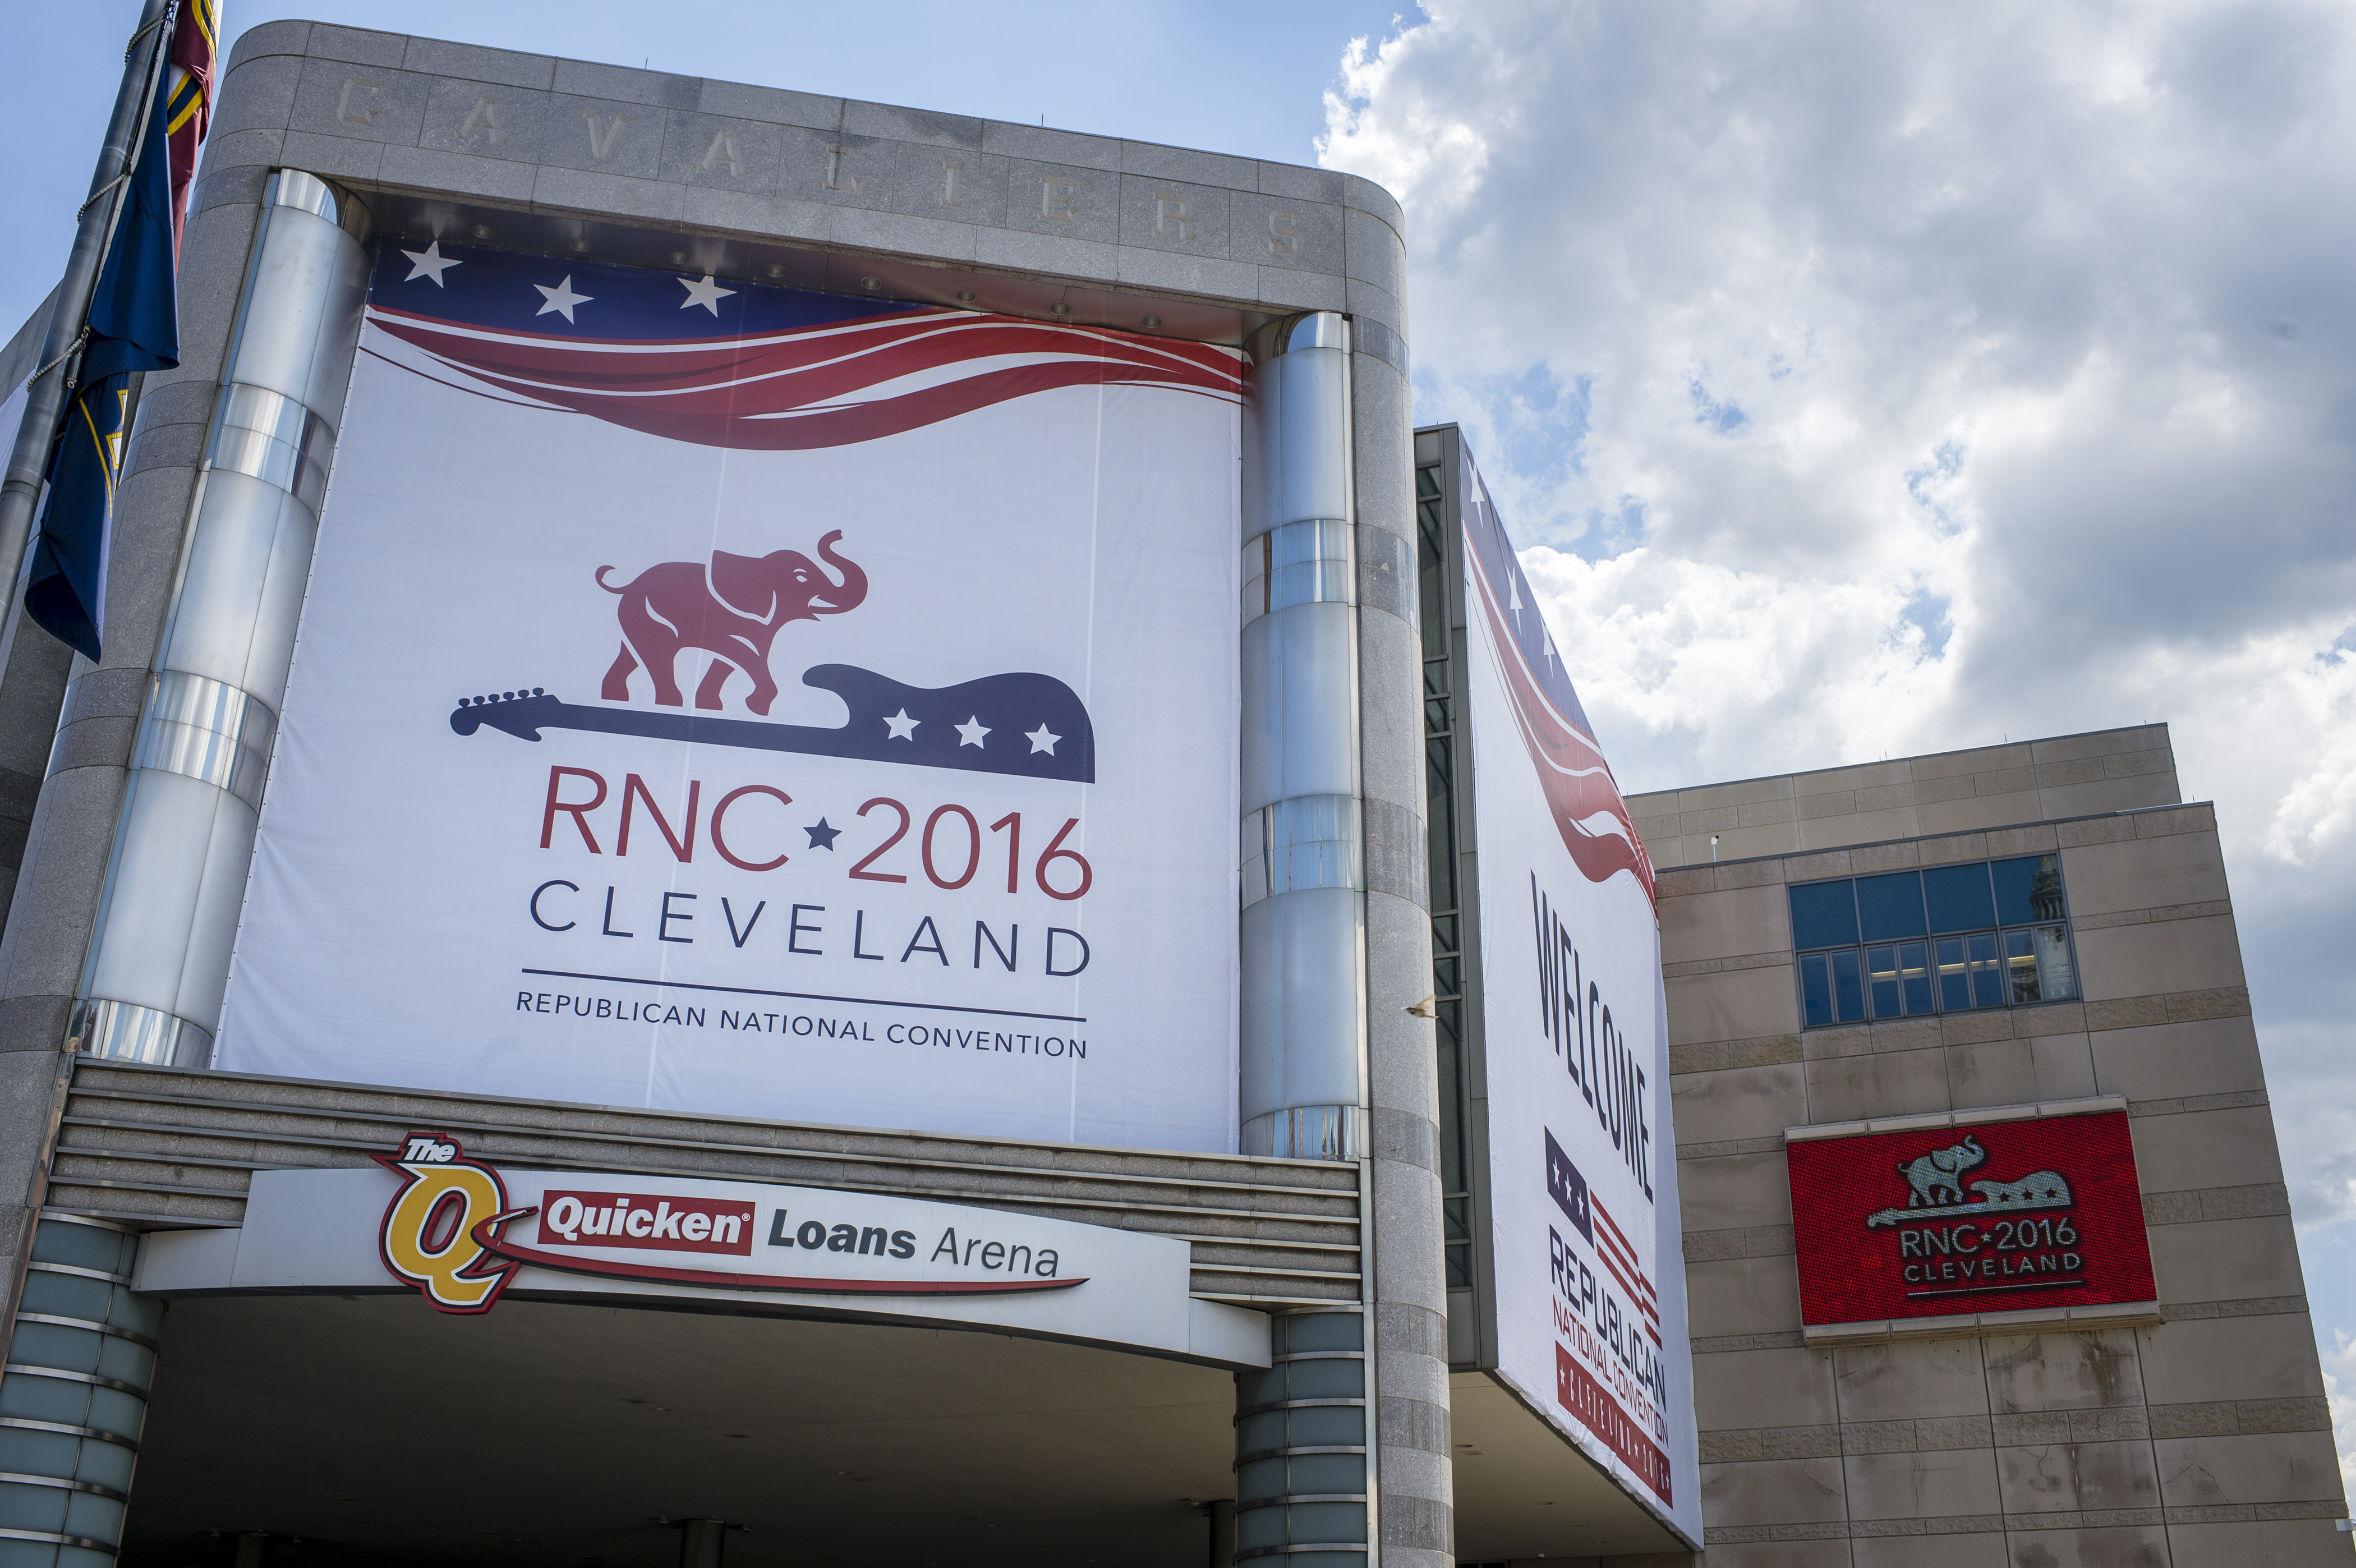 Quicken Loans Arena is decorated to welcome the Republican National Convention on July 11, 2016 in Cleveland, Ohio. (Angelo Merendino—Getty Images)